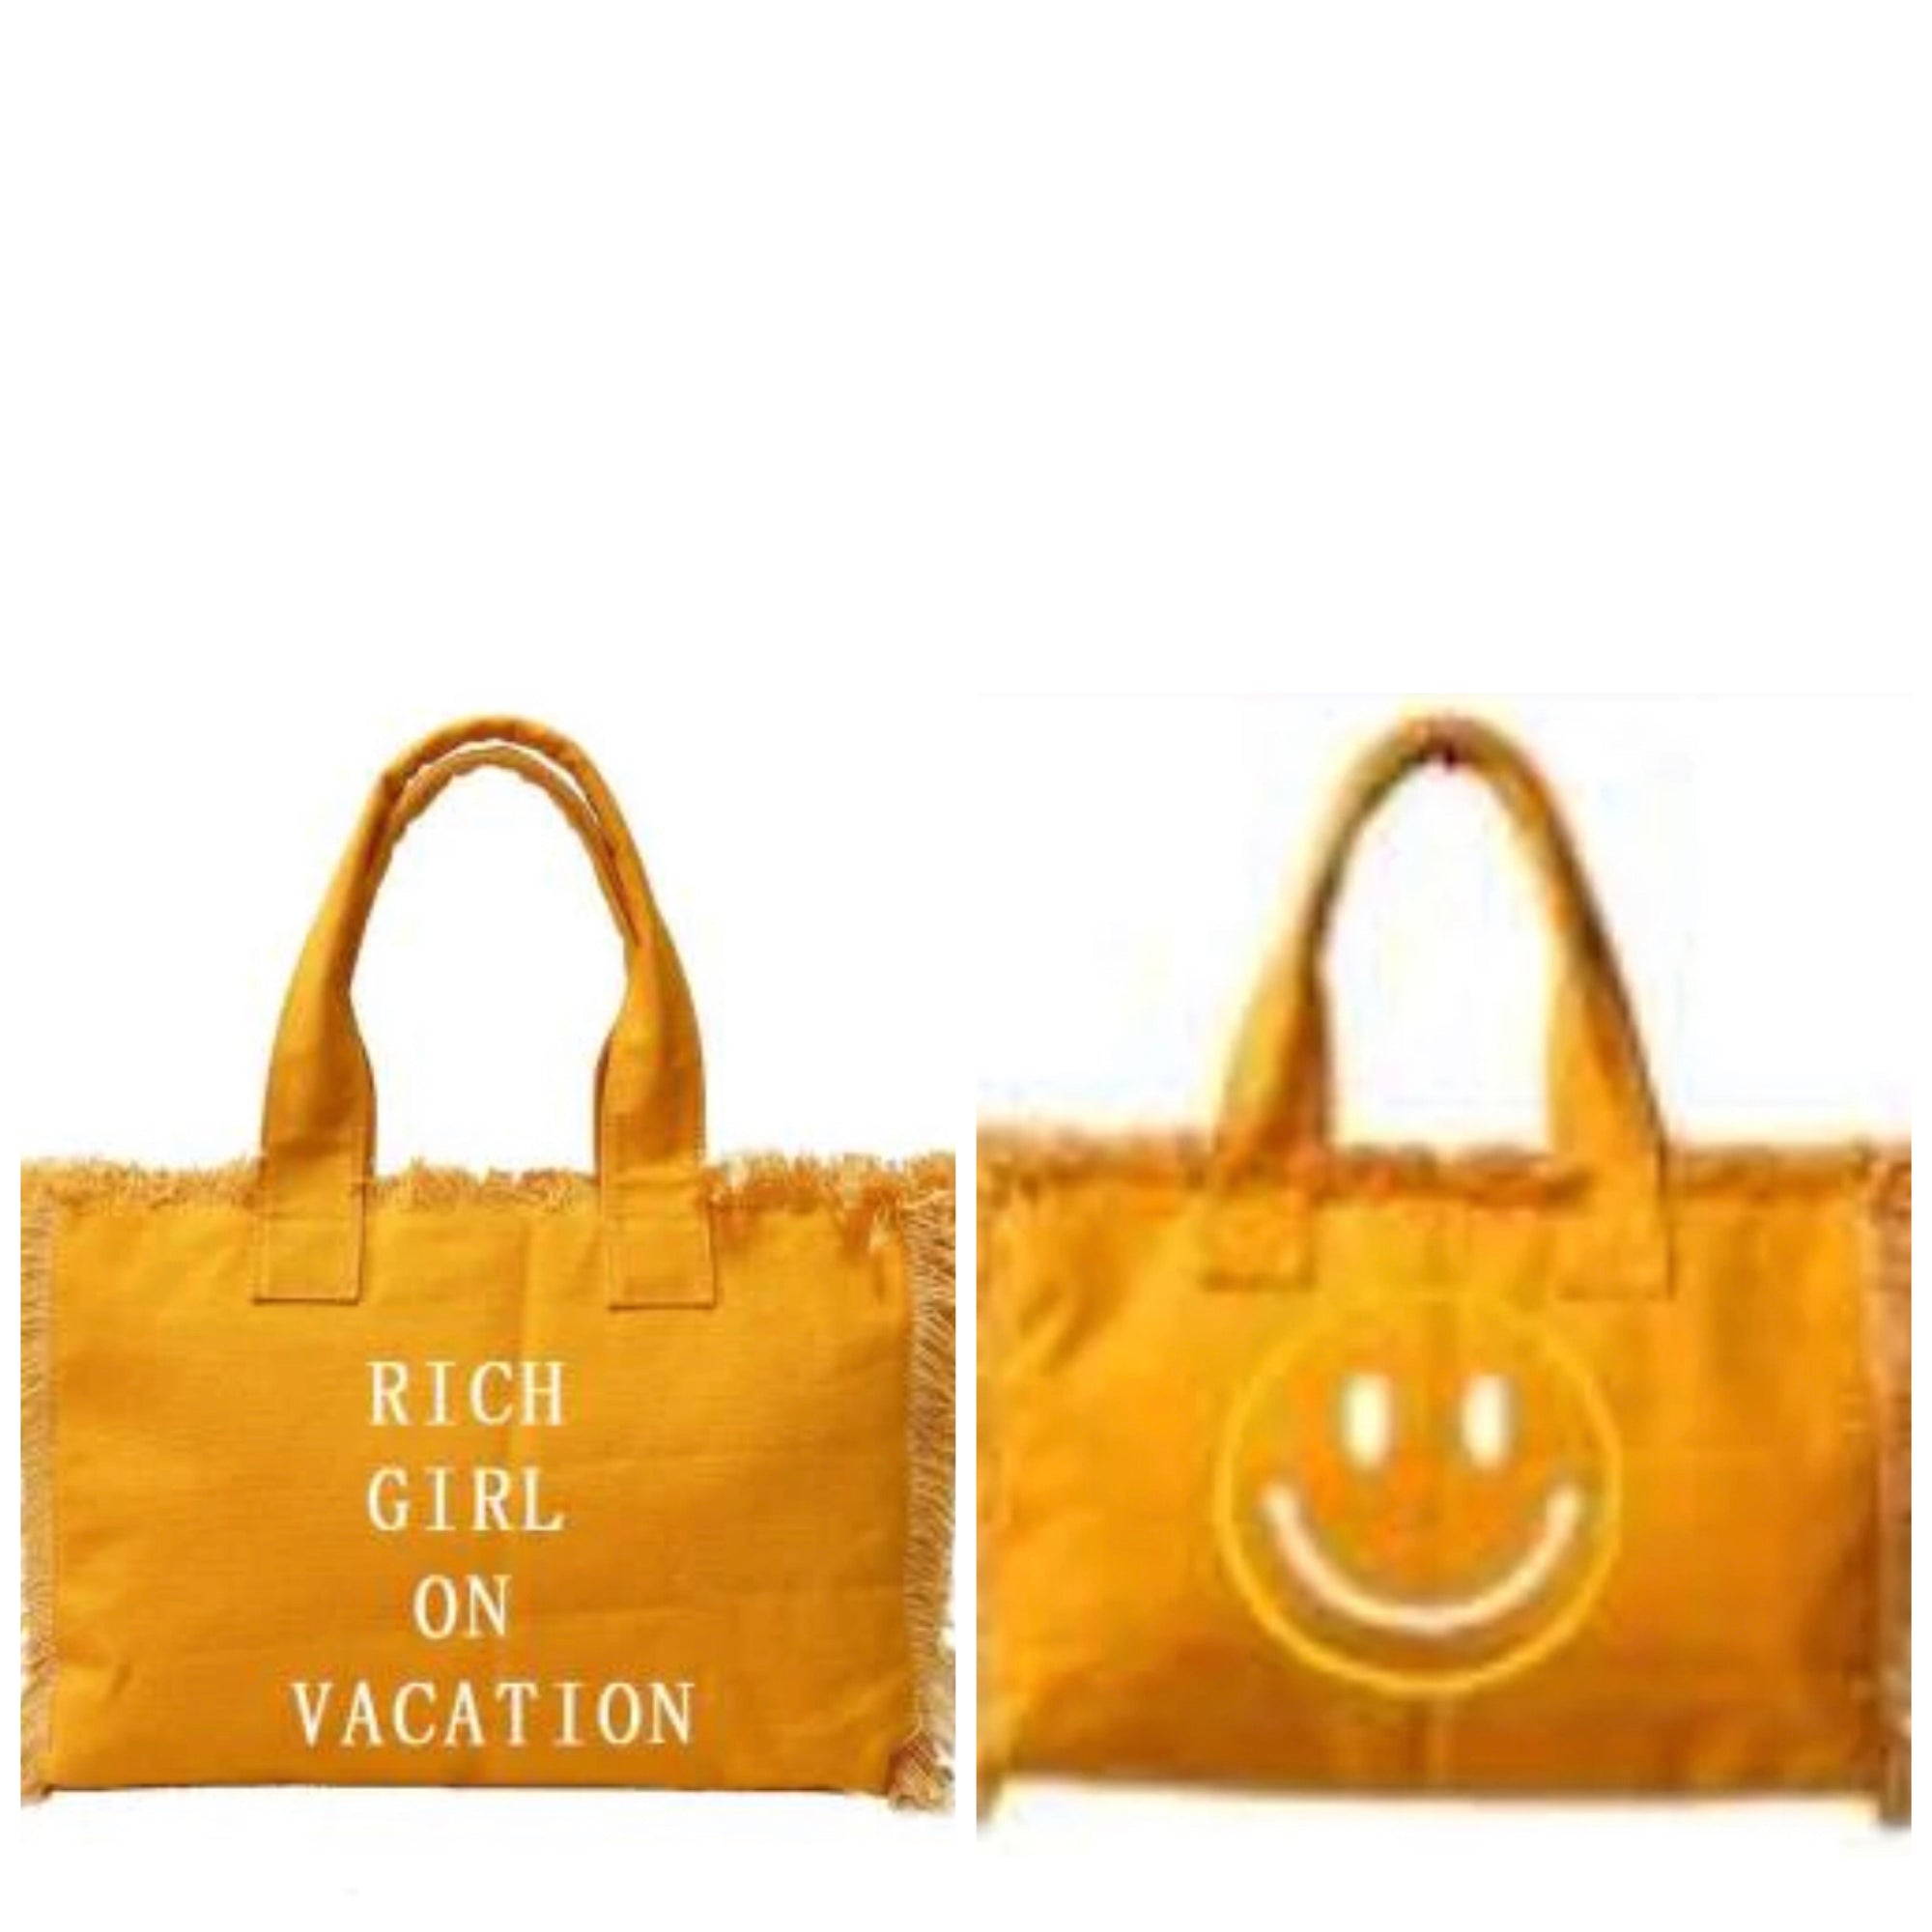 RICH GIRL ON VACATION TOTE